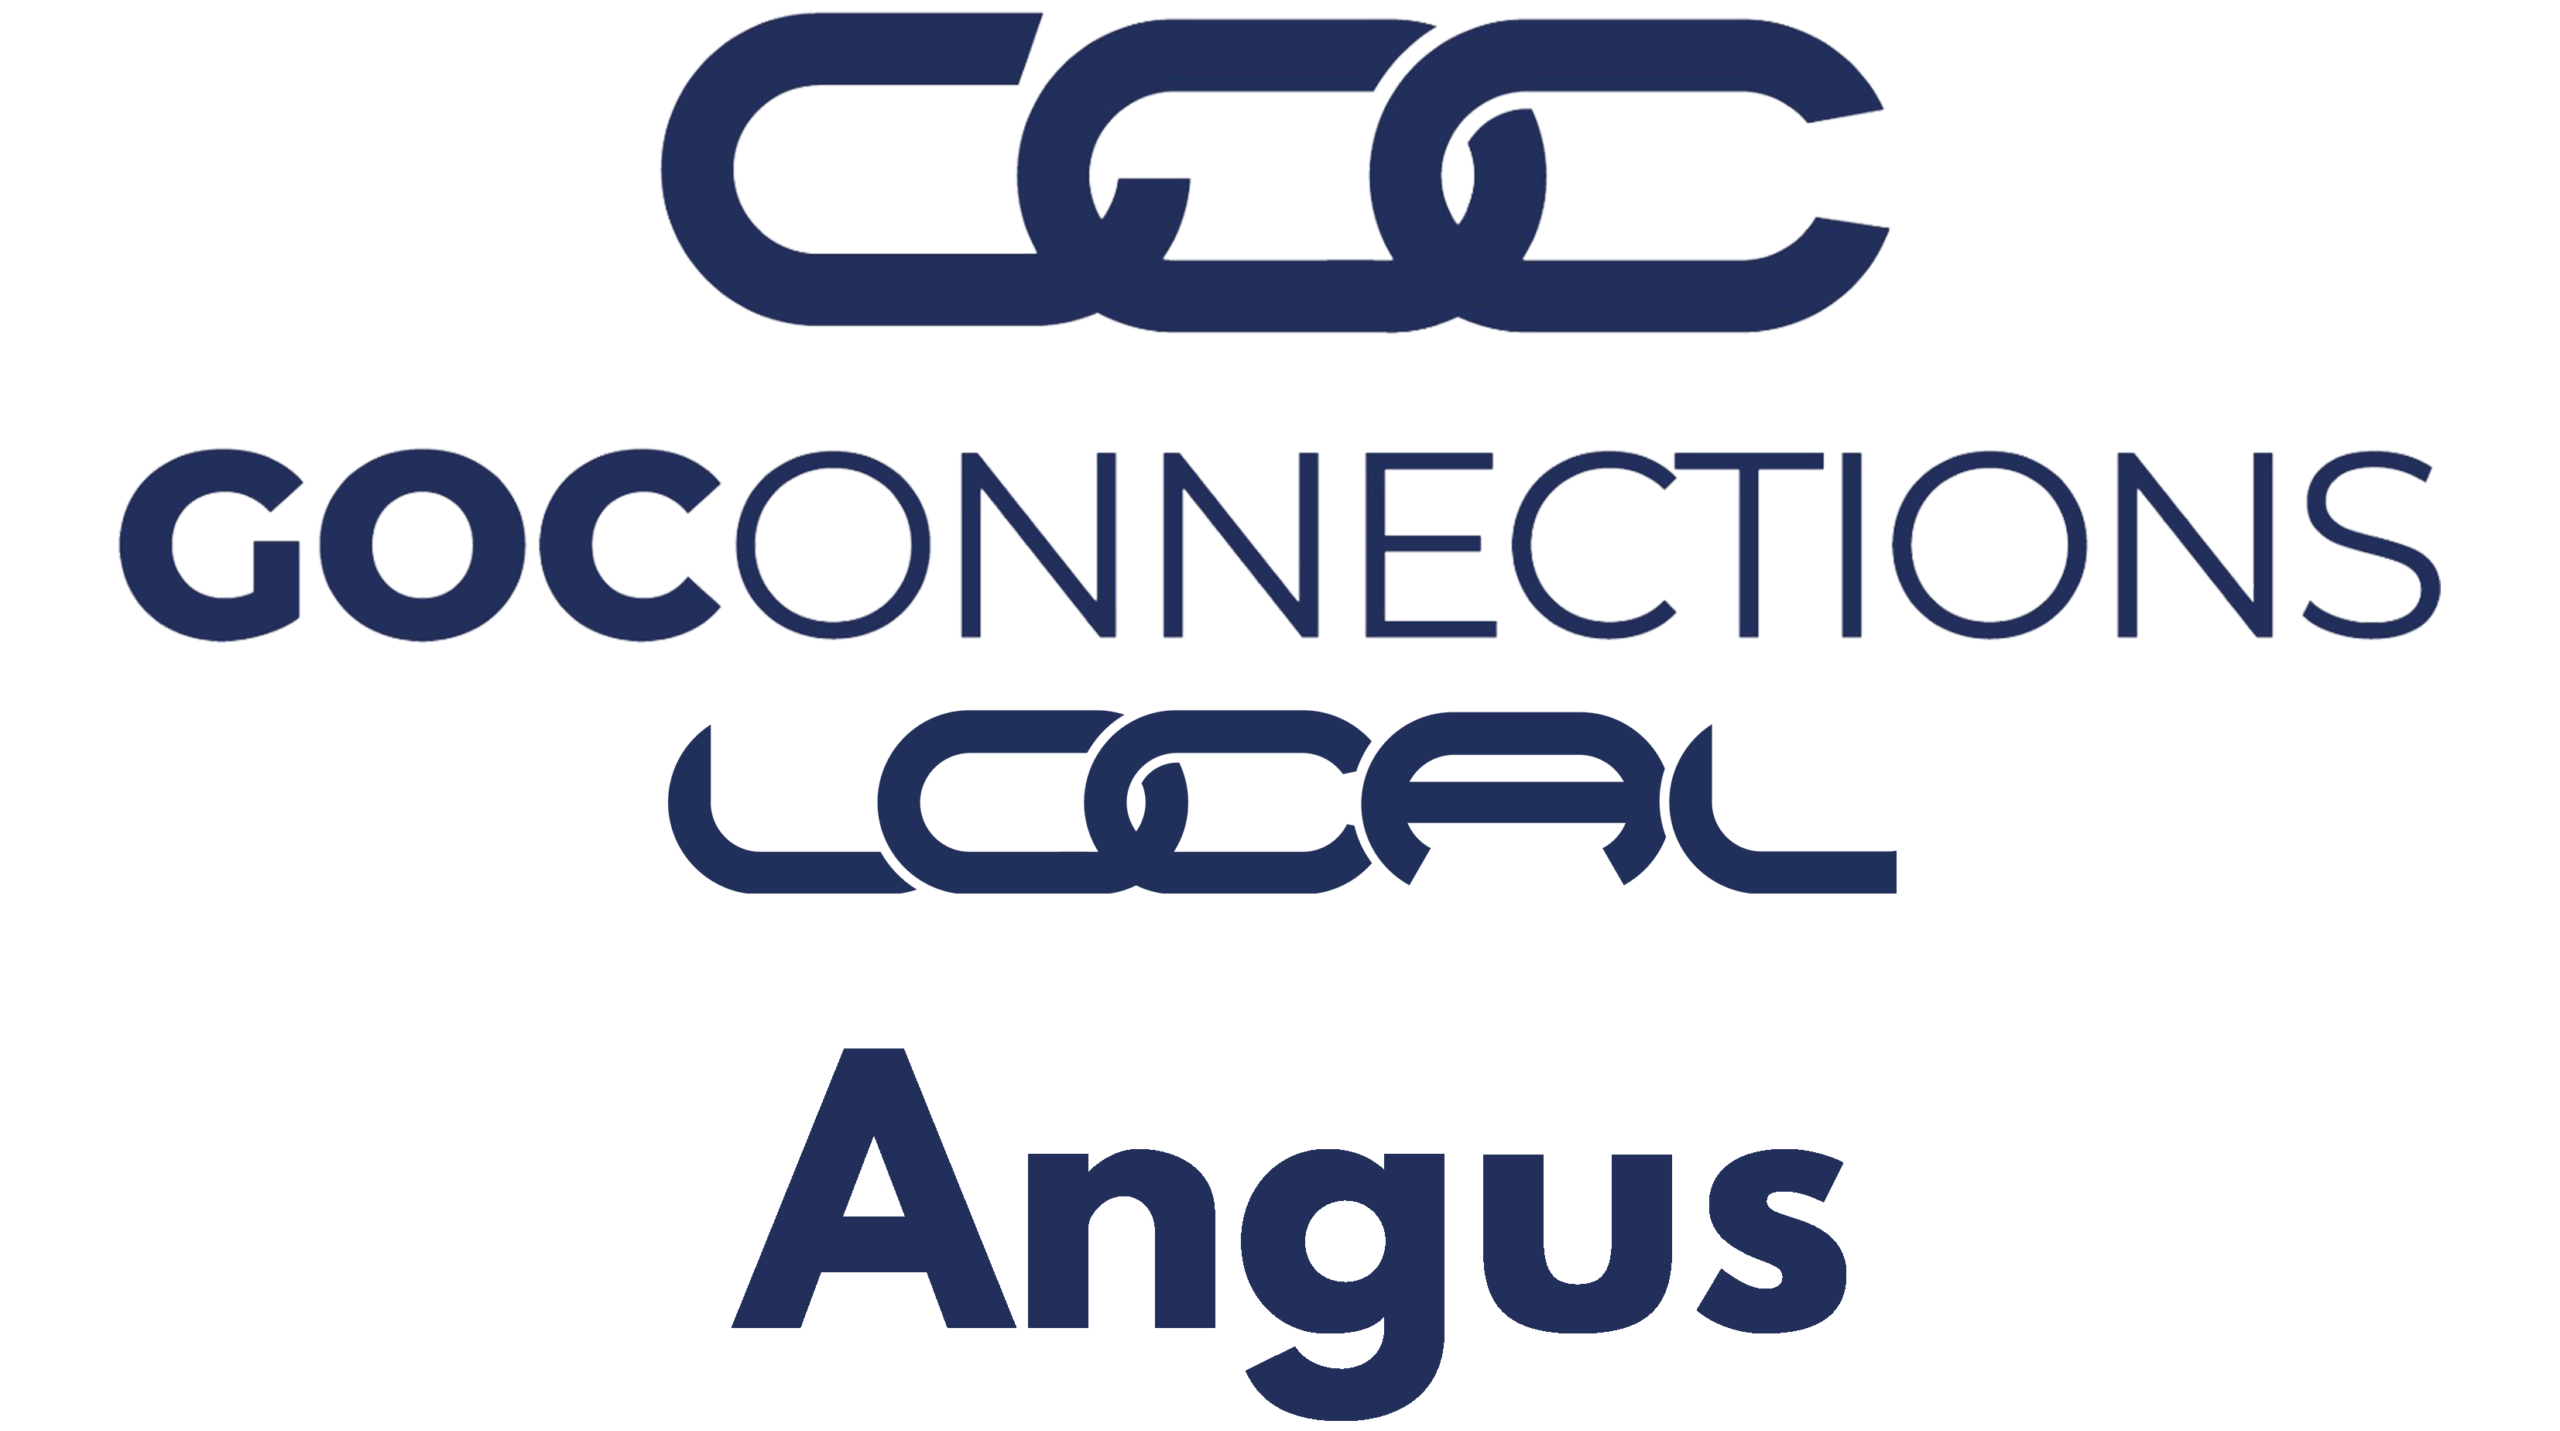 GO-Connections-LOCAL-Angus